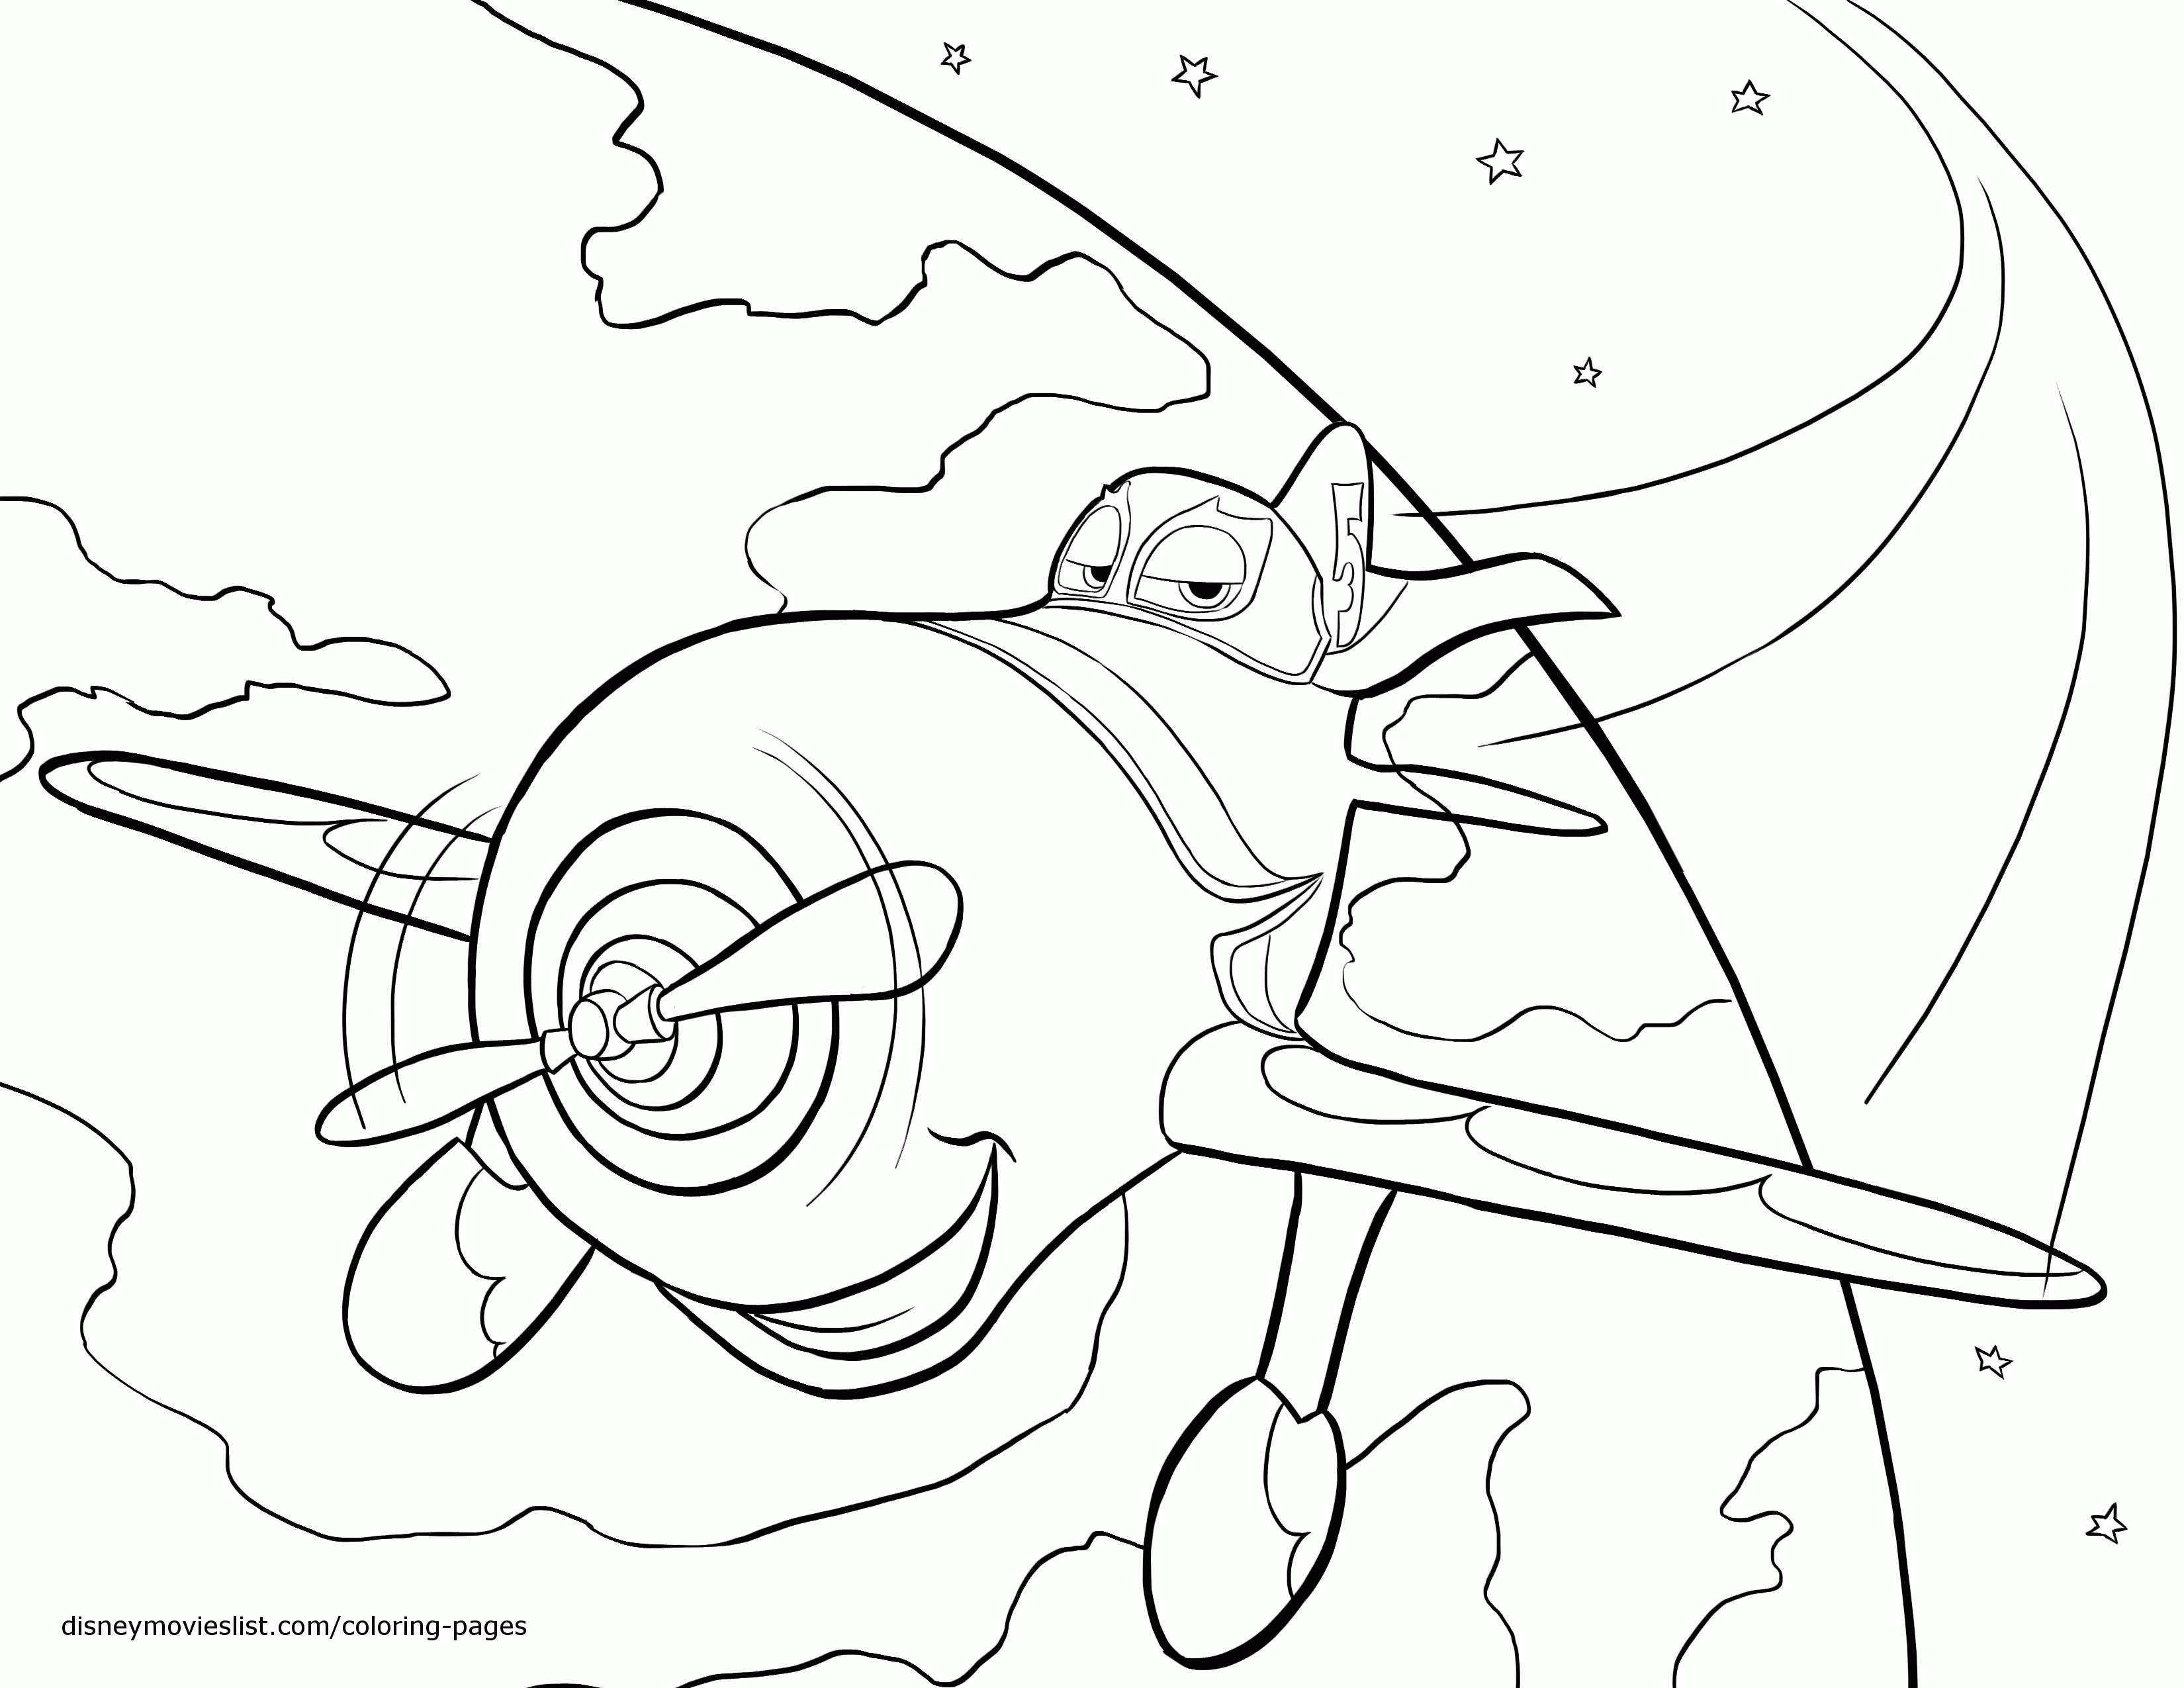 Coloring Pages Of Disney Movies   Coloring Home